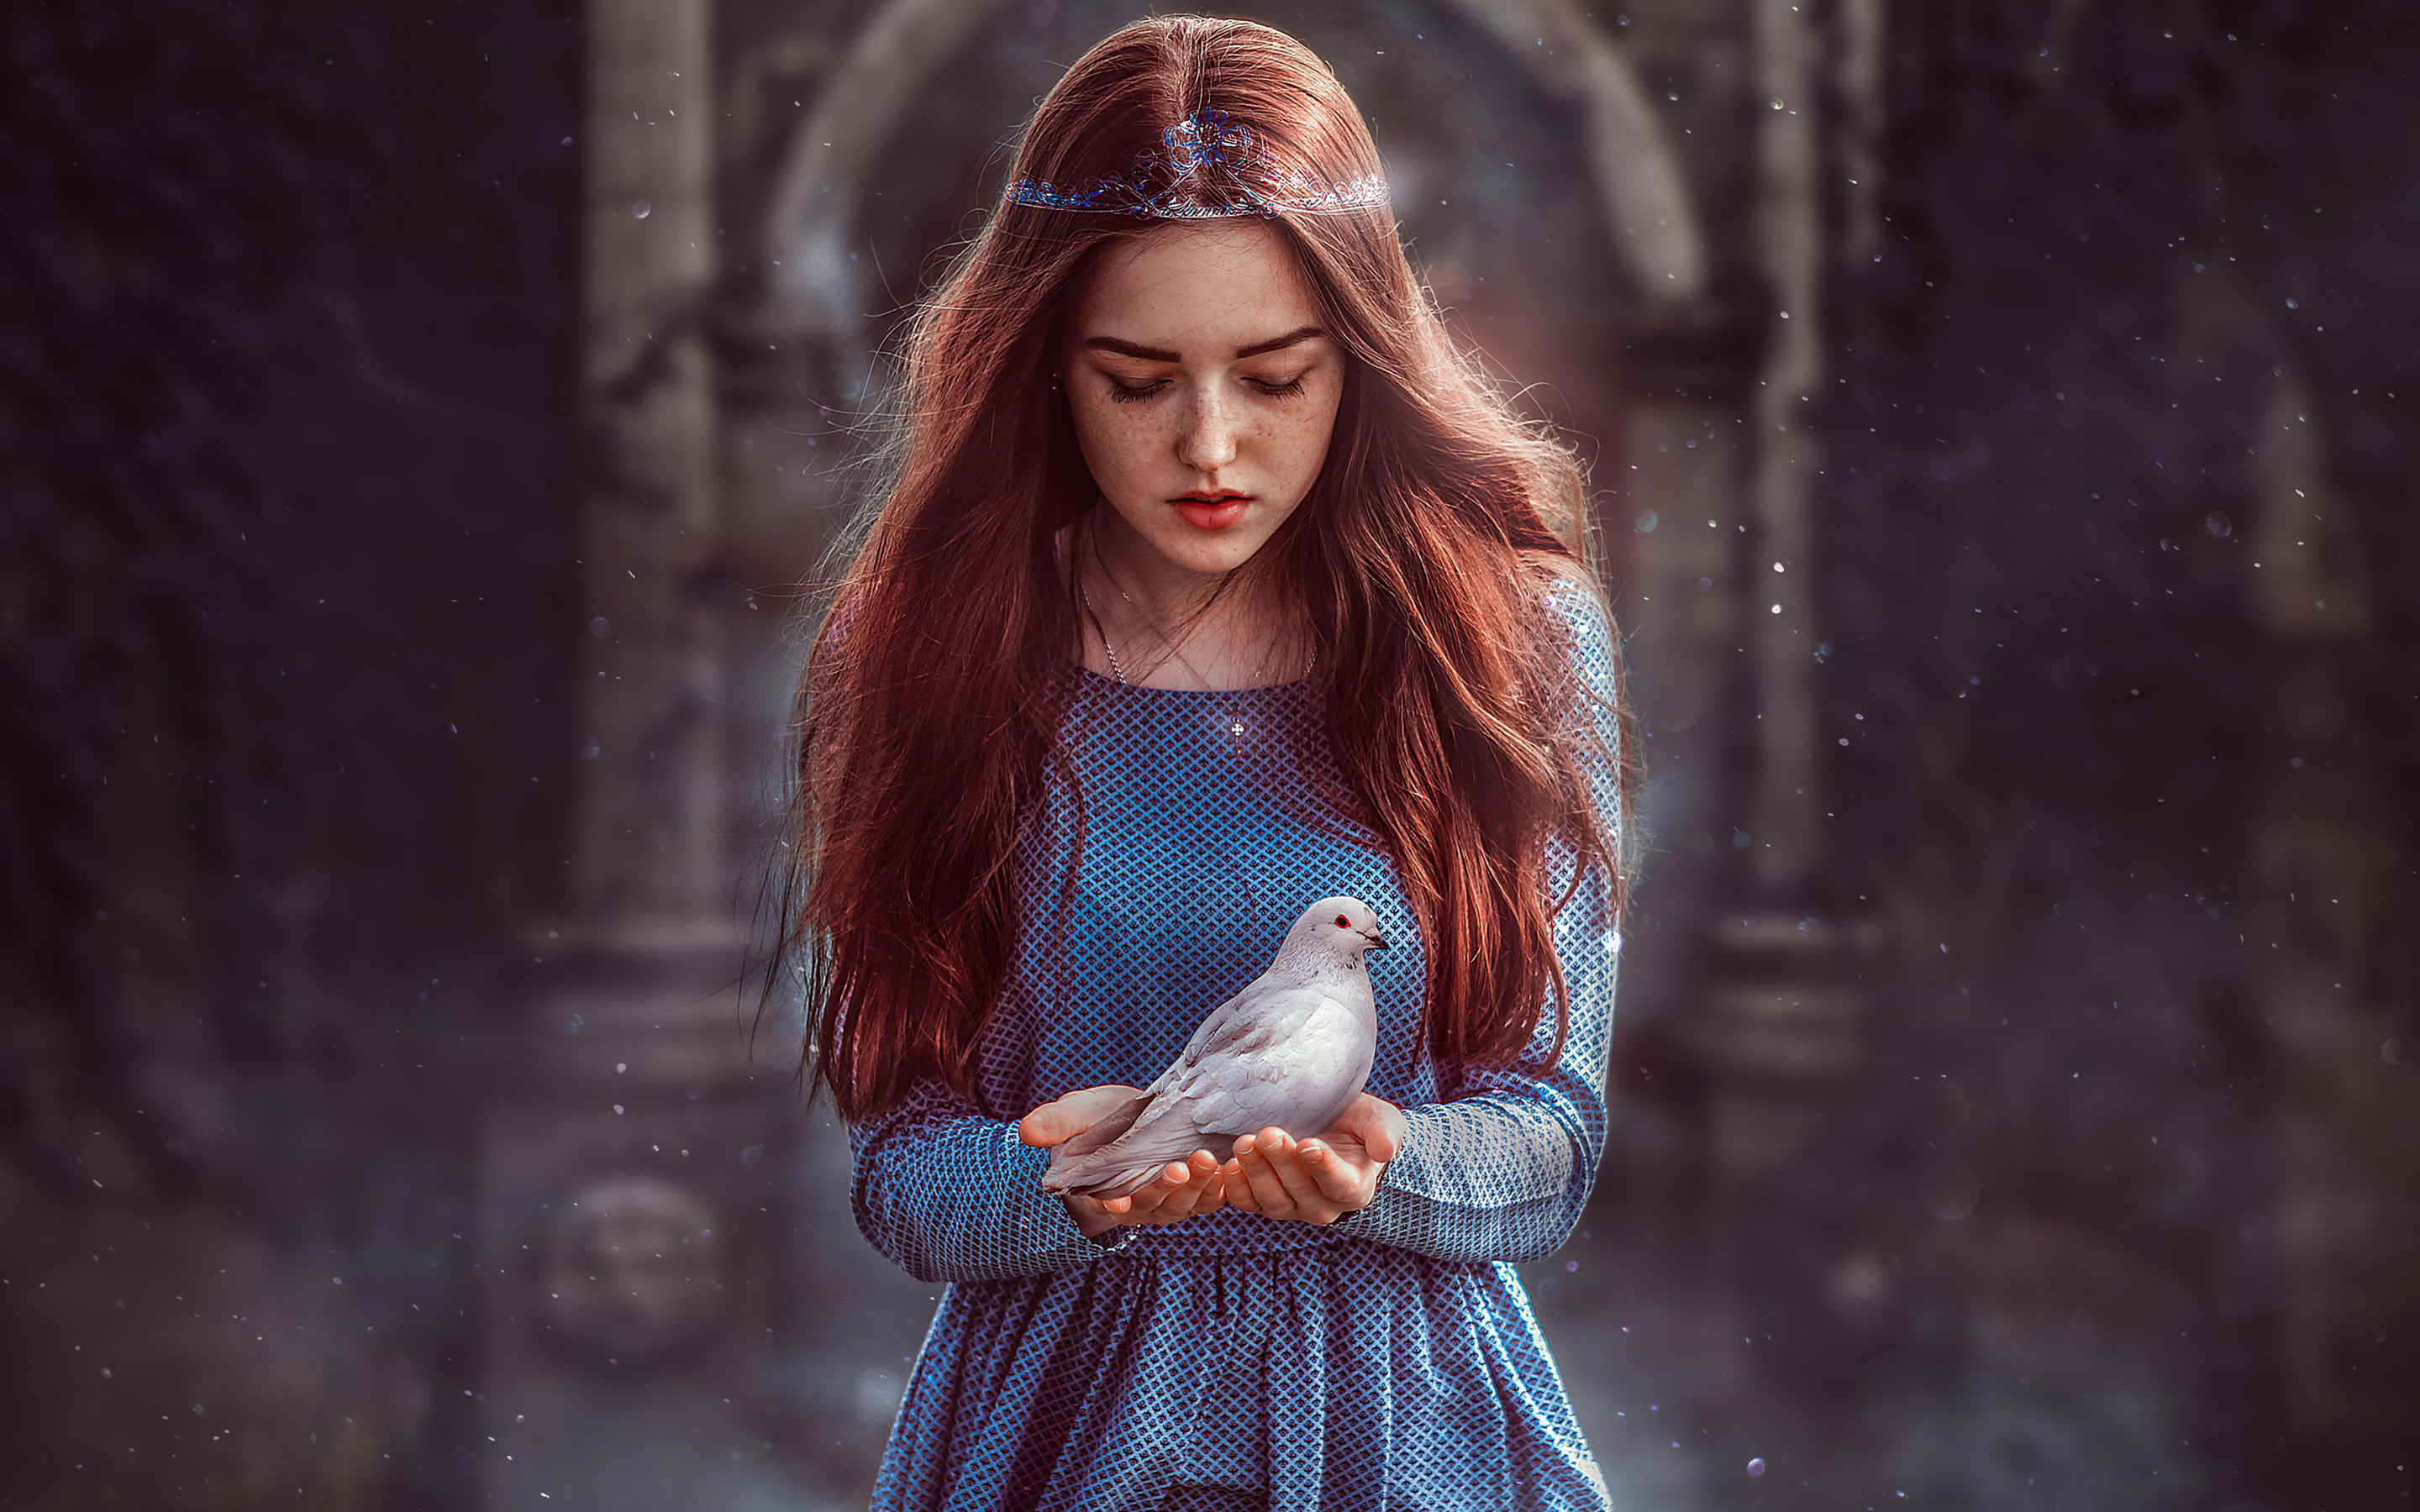 Peace and care, girl model, photoshop, 2880x1800 wallpaper